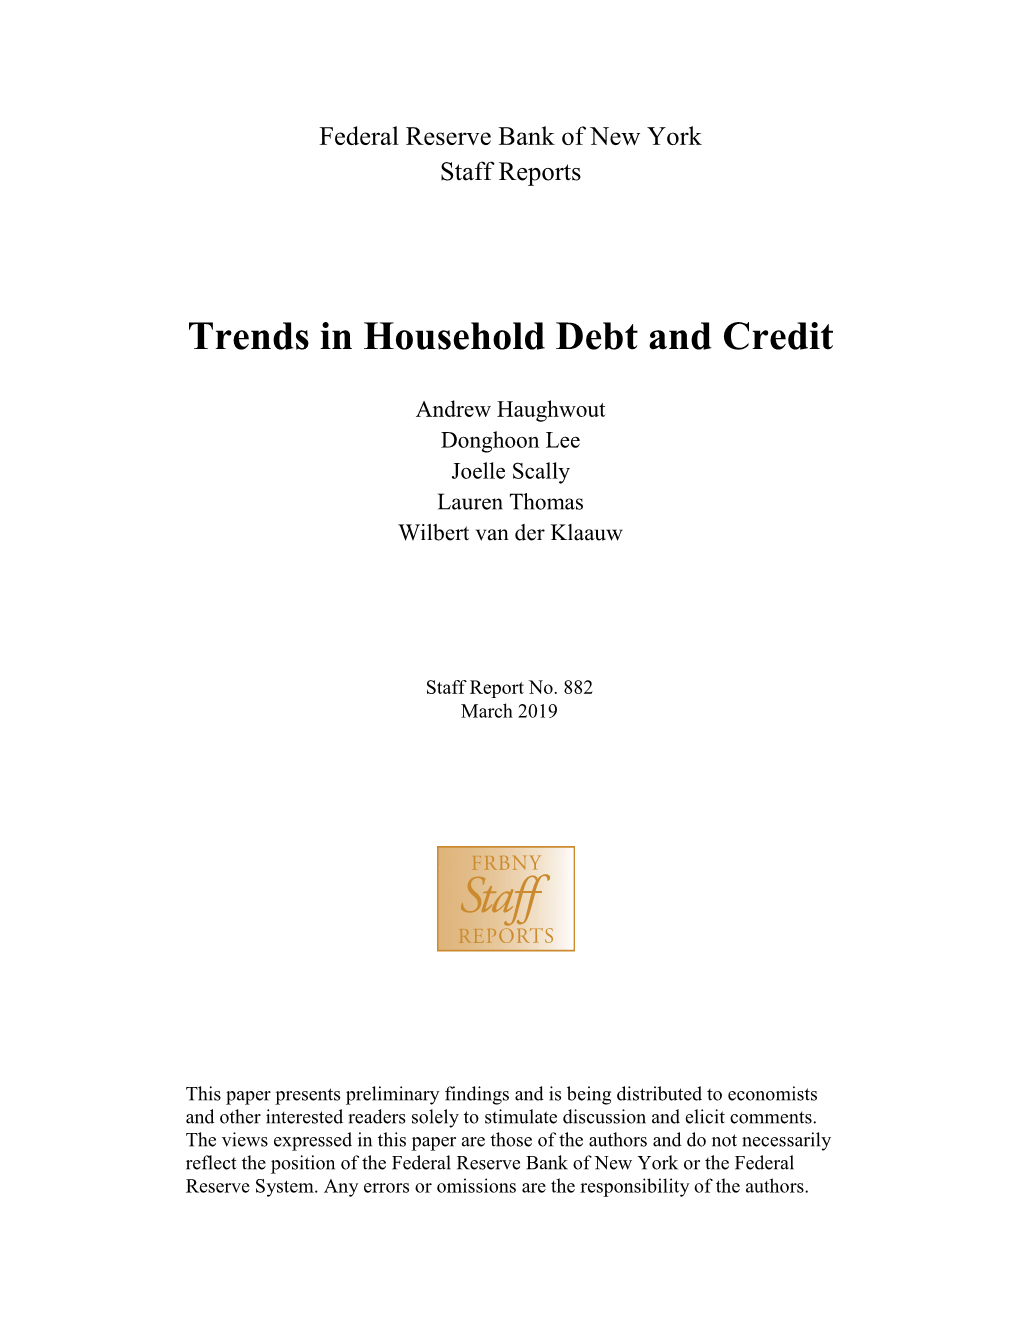 Trends in Household Debt and Credit